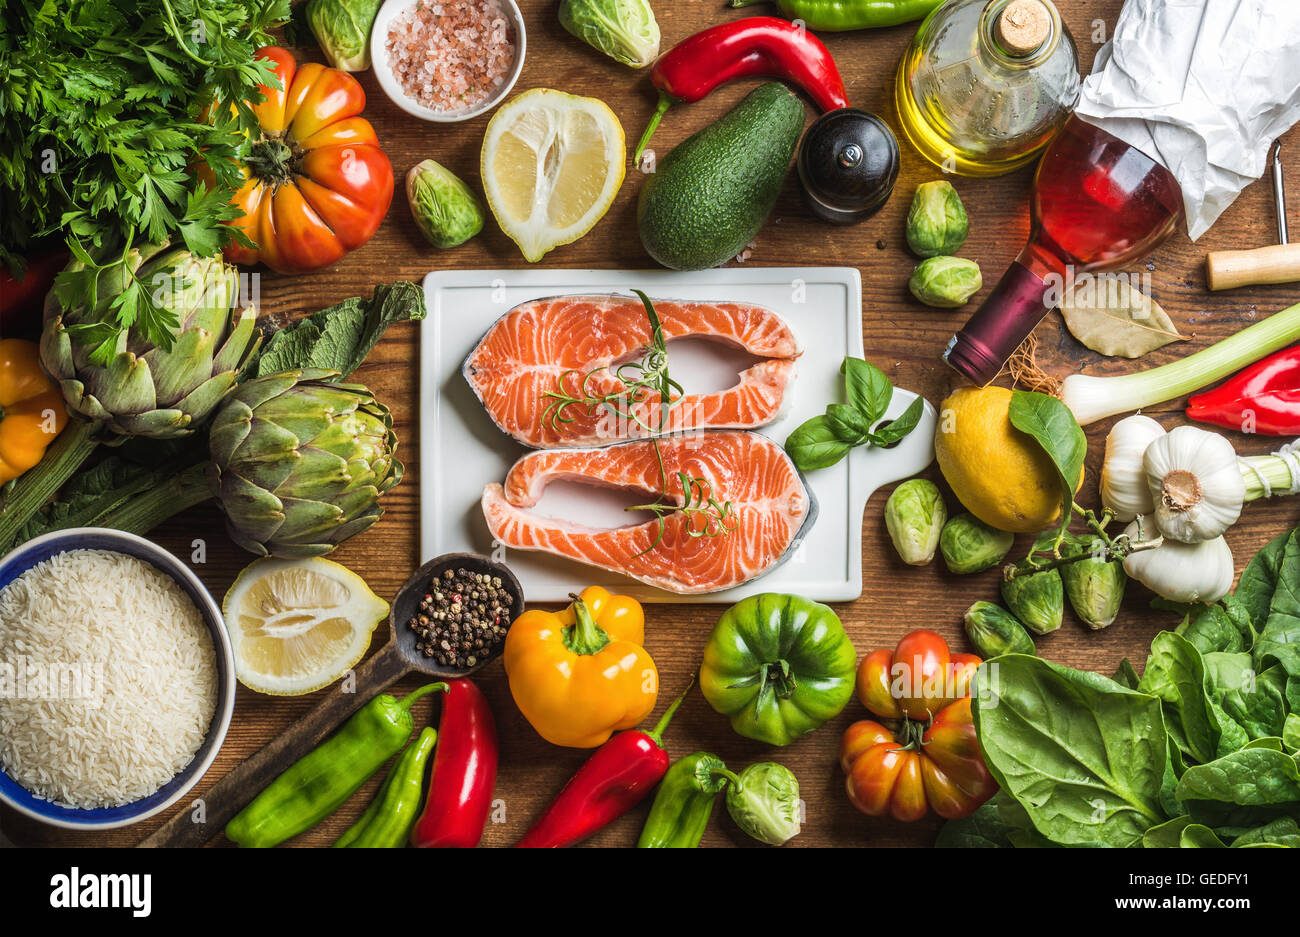 Dinner cooking ingredients. Raw uncooked salmon fish with vegetables, rice, herbs, lemon, artichokes, spices and bottle of rose wine on white ceramic board over rustic wooden background, top view Stock Photo